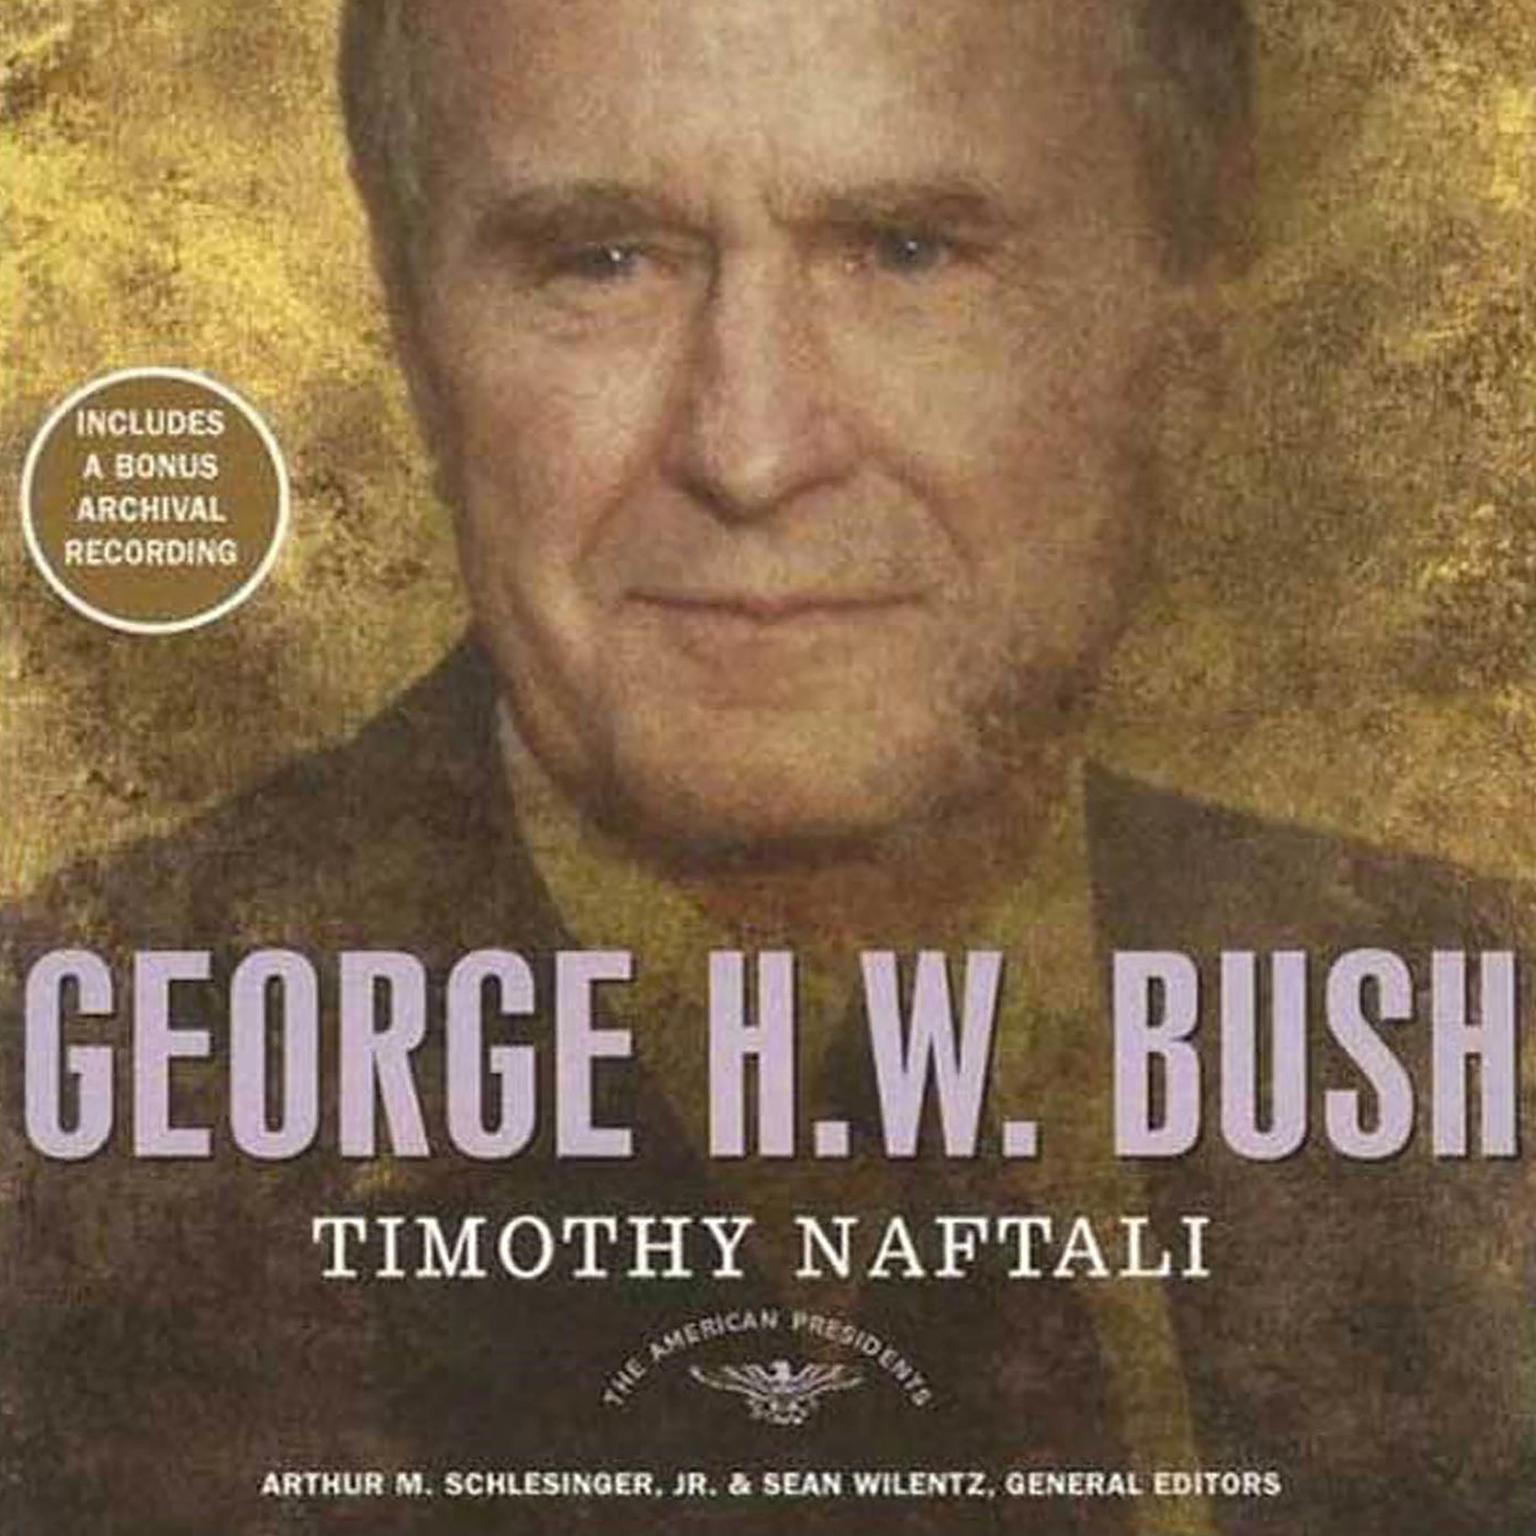 George H. W. Bush: The American Presidents Series: The 41st President, 1989-1993 Audiobook, by Timothy Naftali